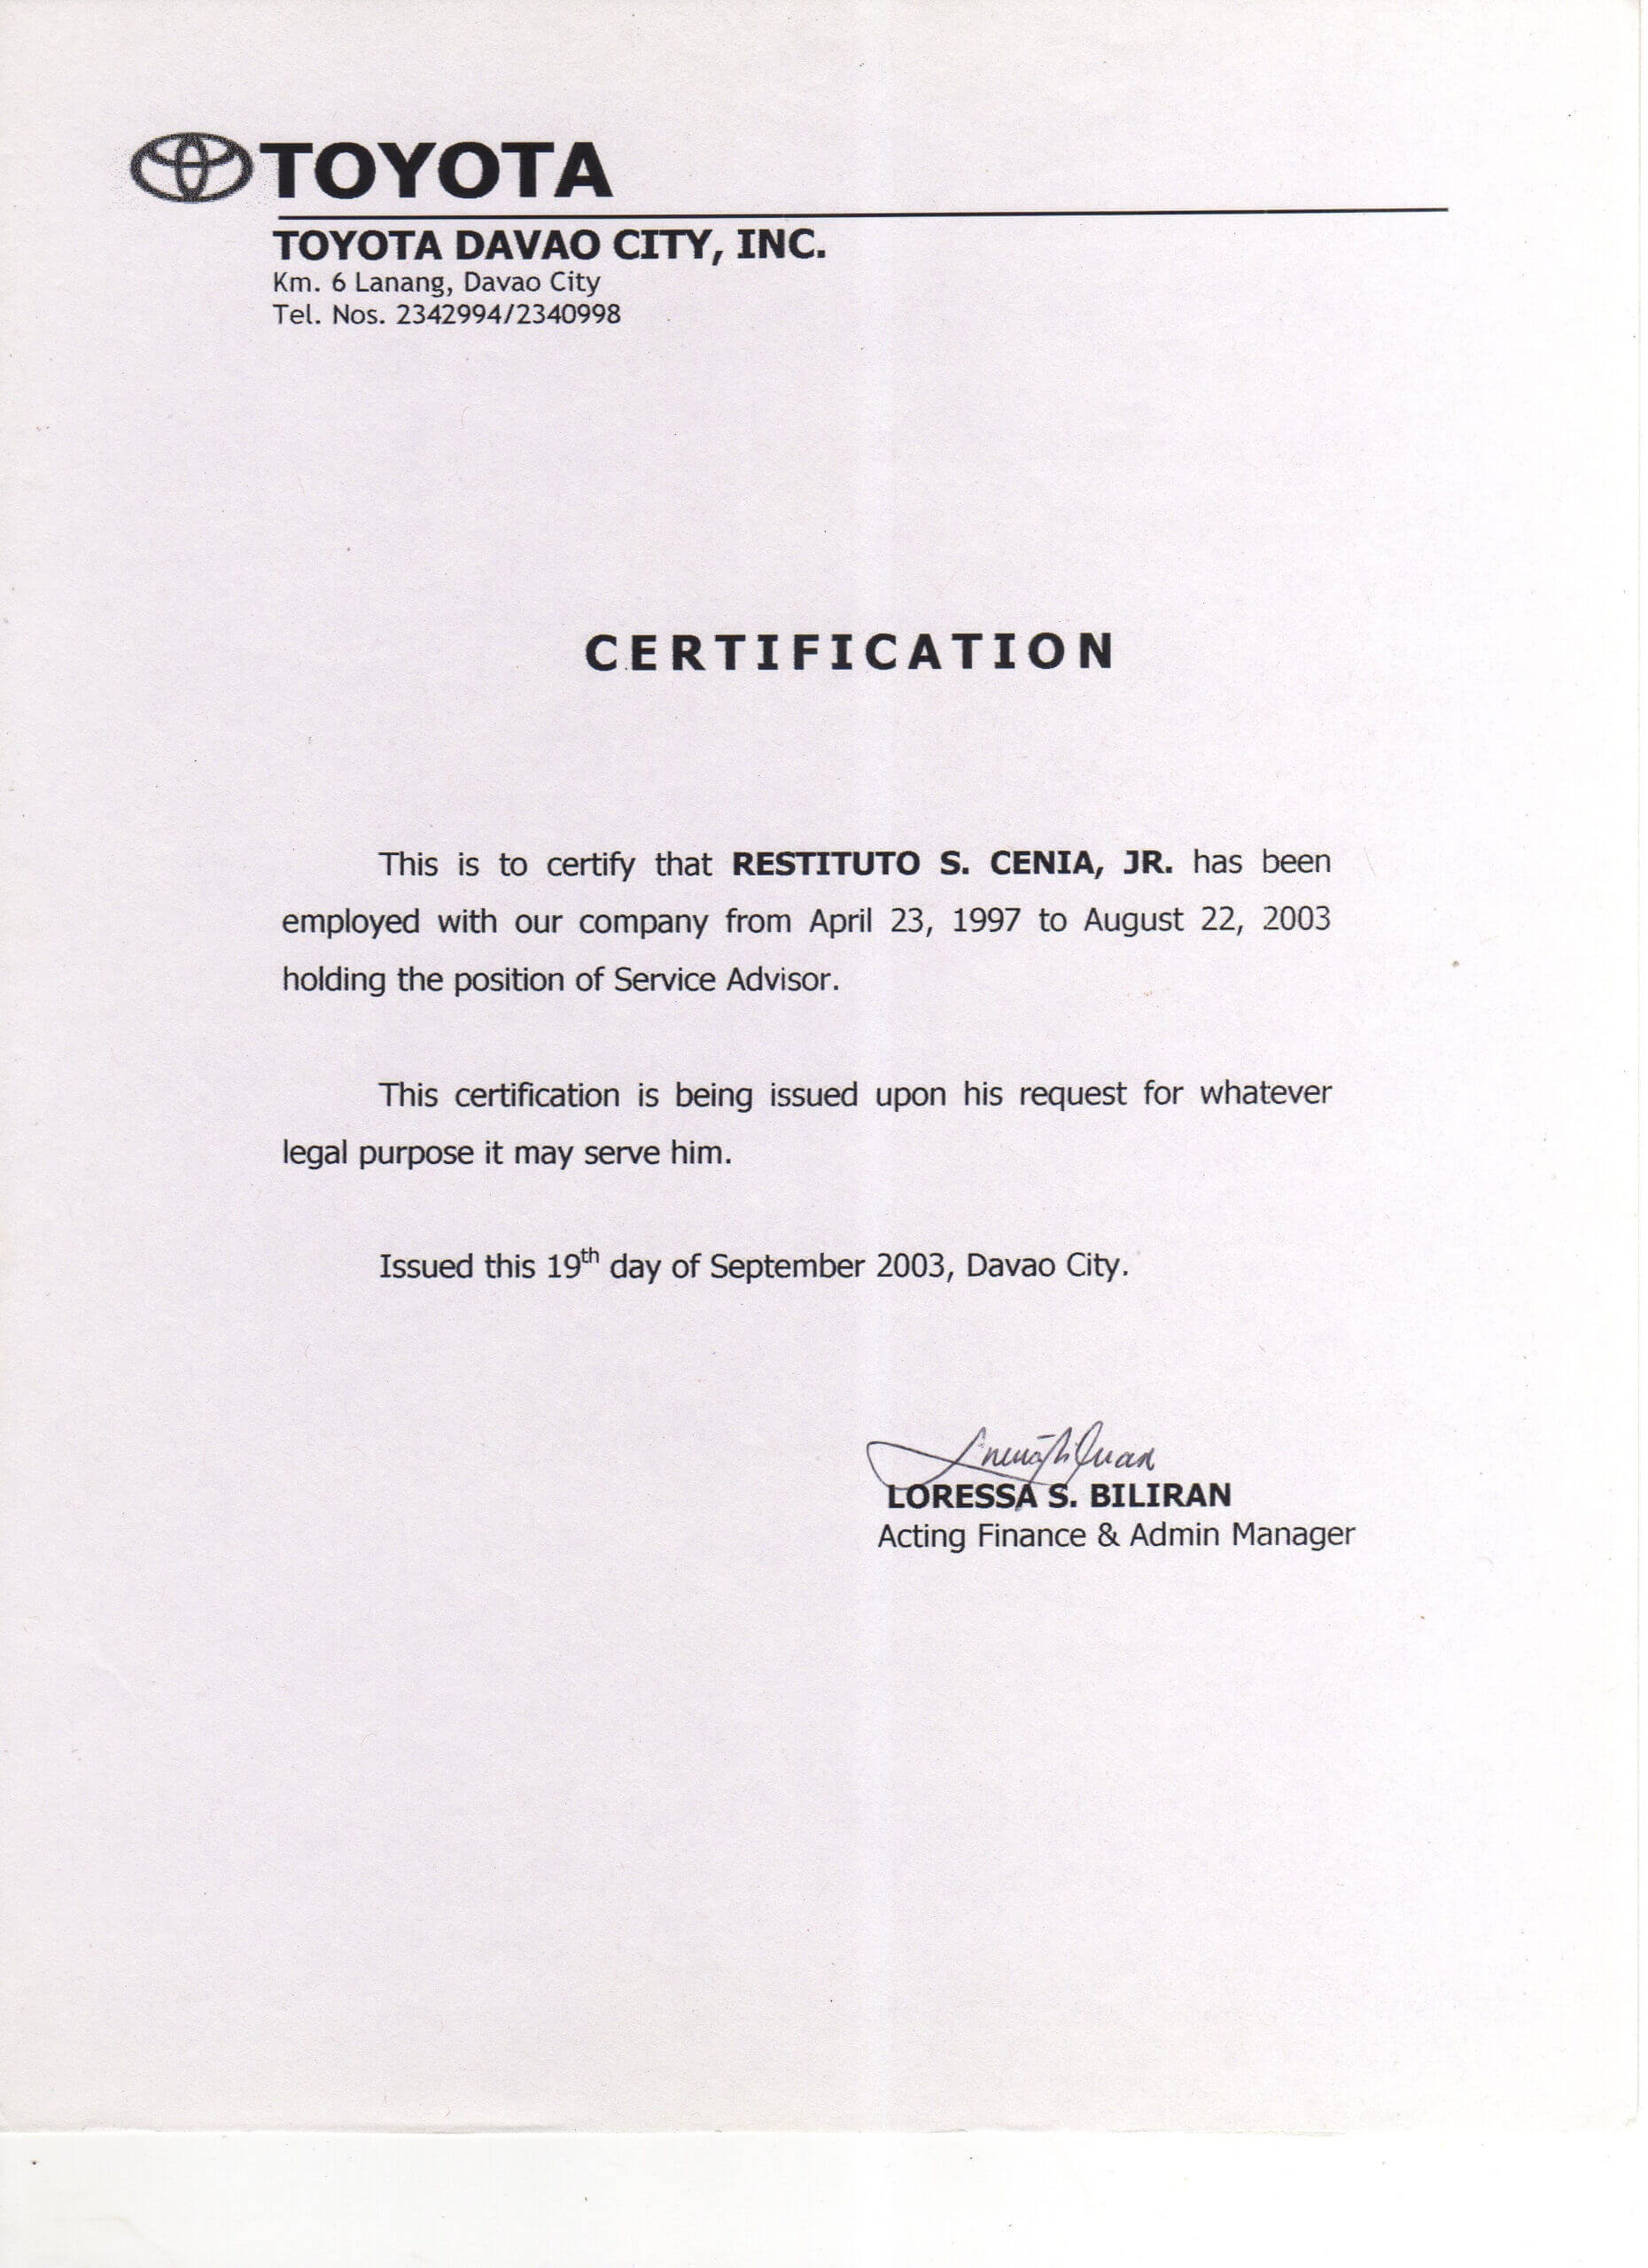 Sample Certificate Of Employment And Compensation – Forza Intended For Good Job Certificate Template